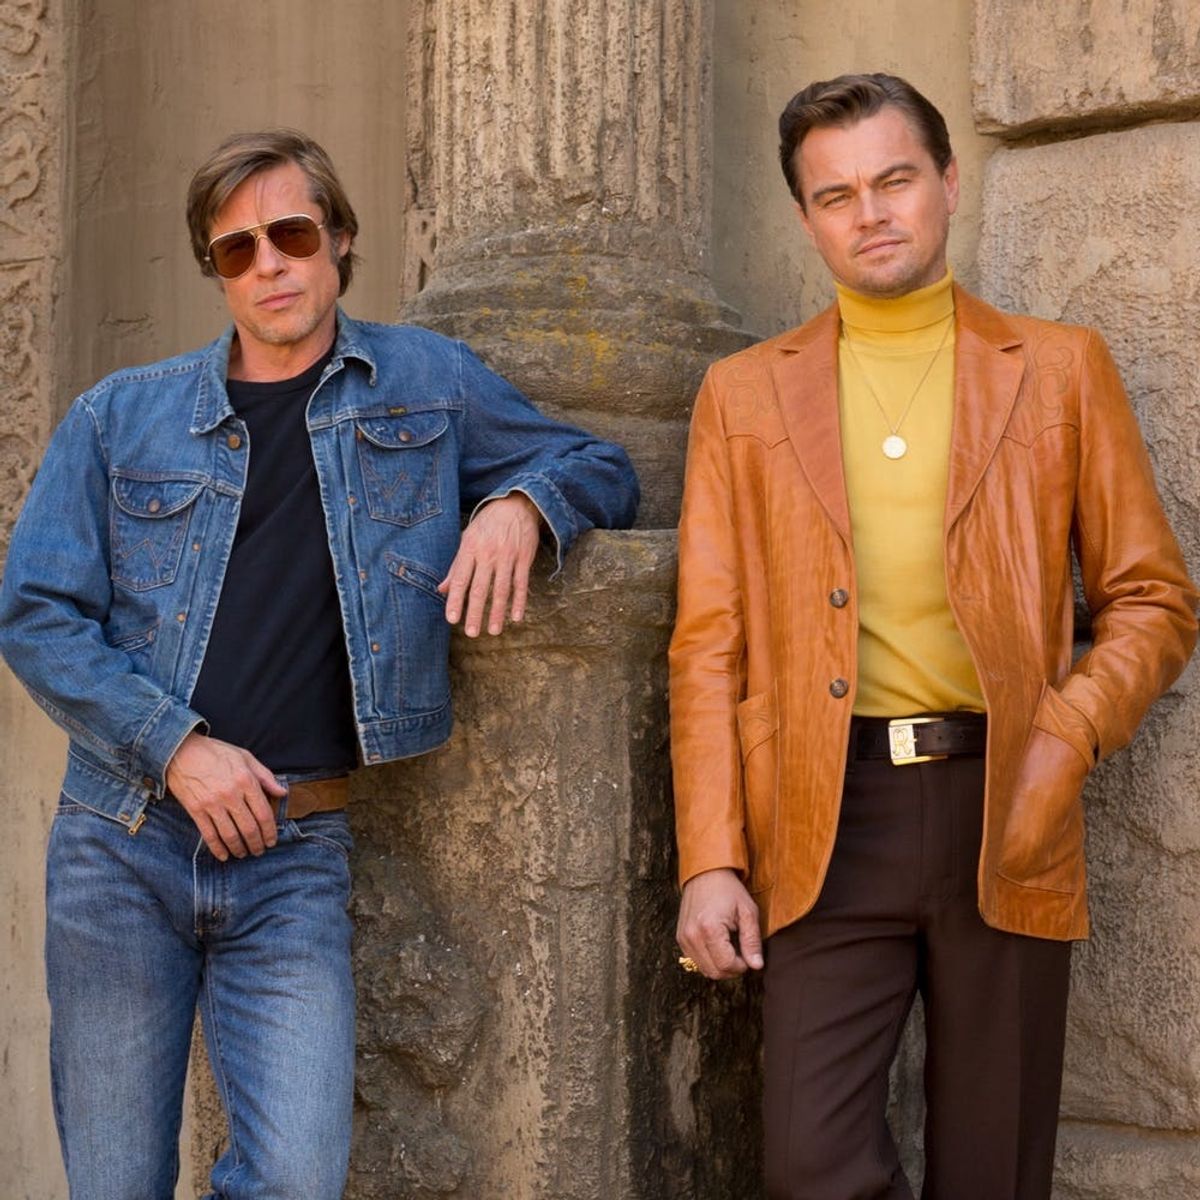 See Leonardo DiCaprio and Brad Pitt’s Retro Style for ‘Once Upon a Time in Hollywood’